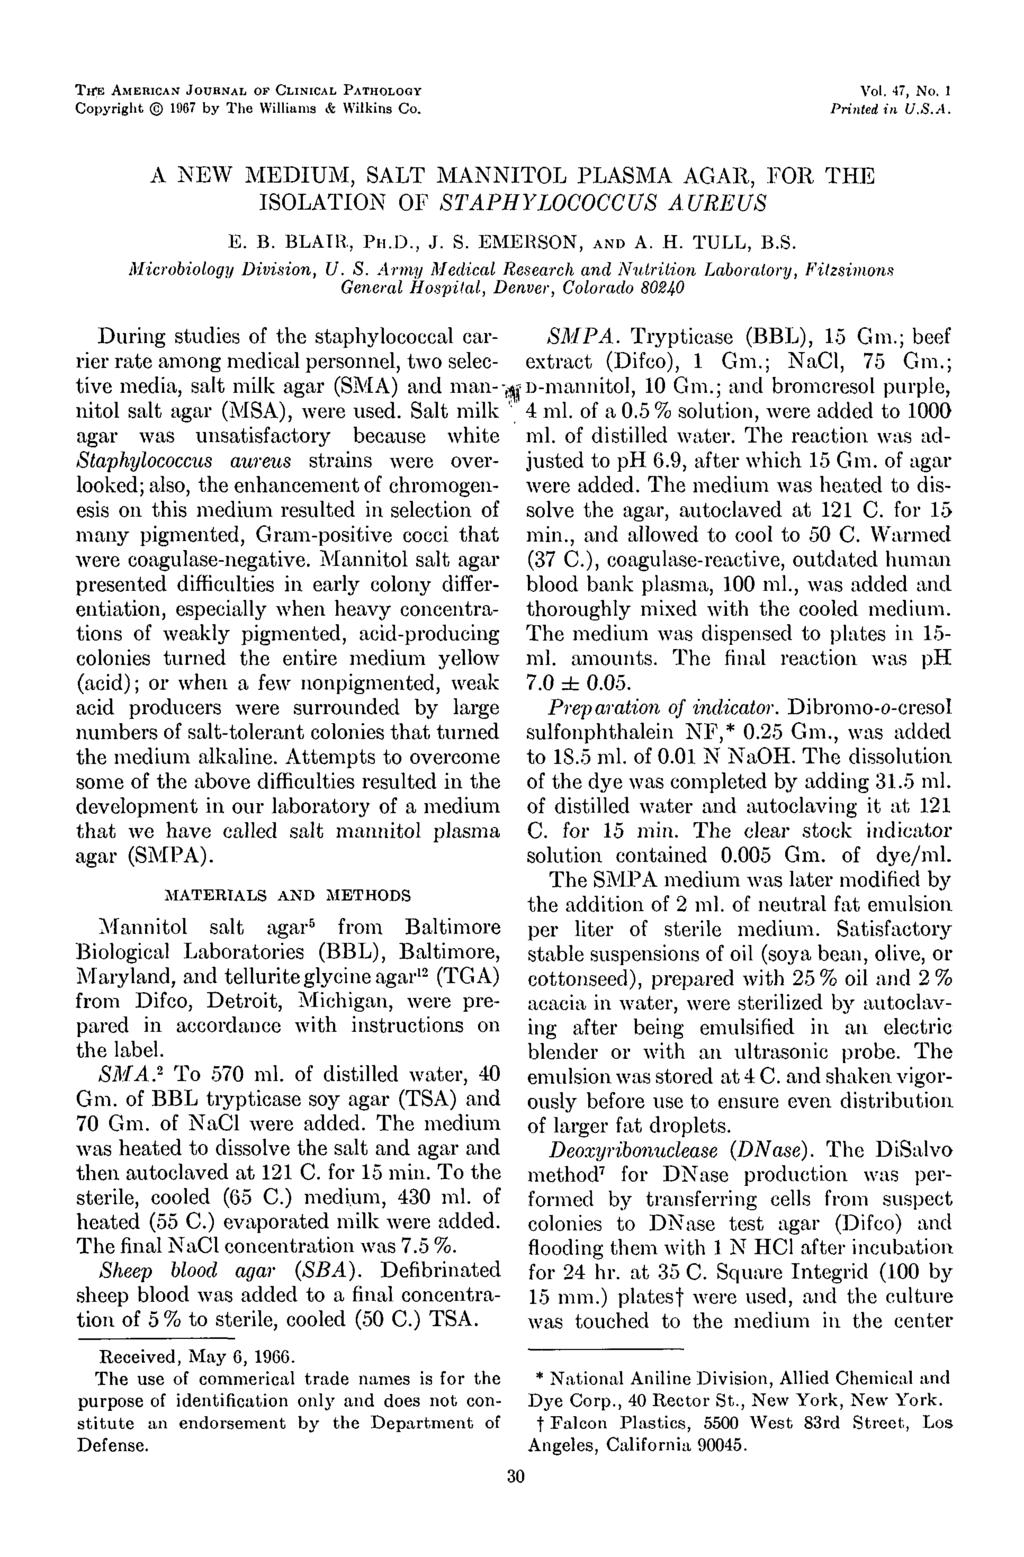 TITE AMERICAN JOUBNAL OF CLINICAL PATHOLOGY Copyright 1967 by The Williams & Wilkins Co. Vol. 47, No. 1 Printed in U.S.A. A NEW MEDIUM, SALT MANNITOL PLASMA AGAR, FOR THE ISOLATION OF STAPHYLOCOCCUS AUREUS E.